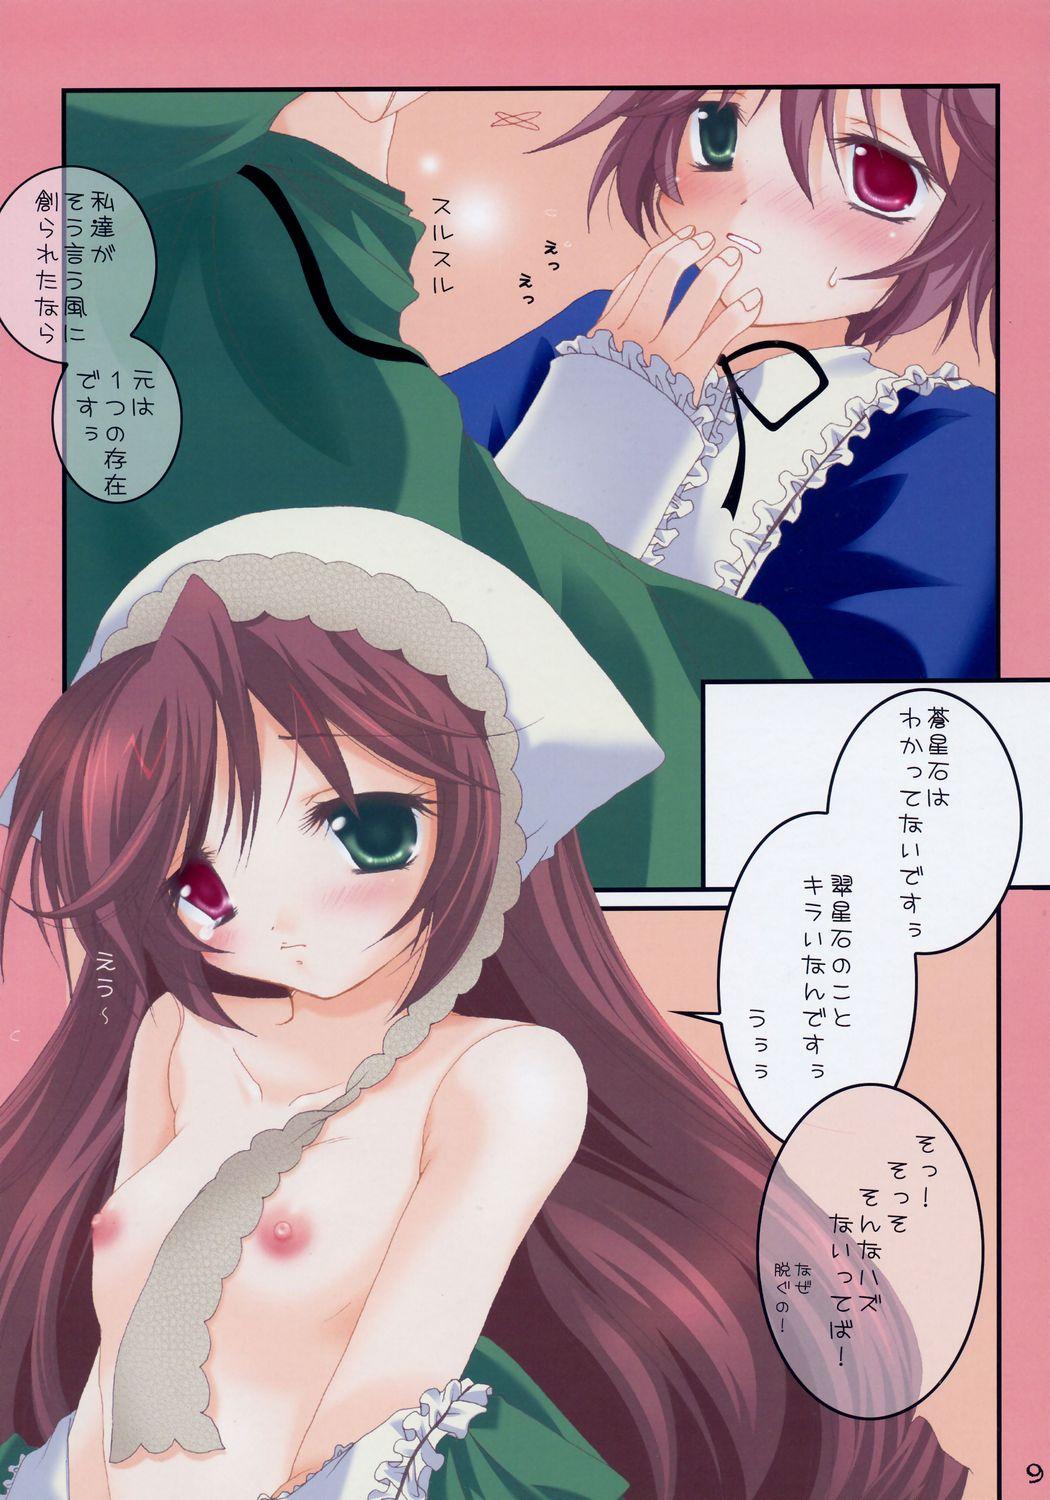 Titties Holy 2 - Rozen maiden Redhead - Page 8